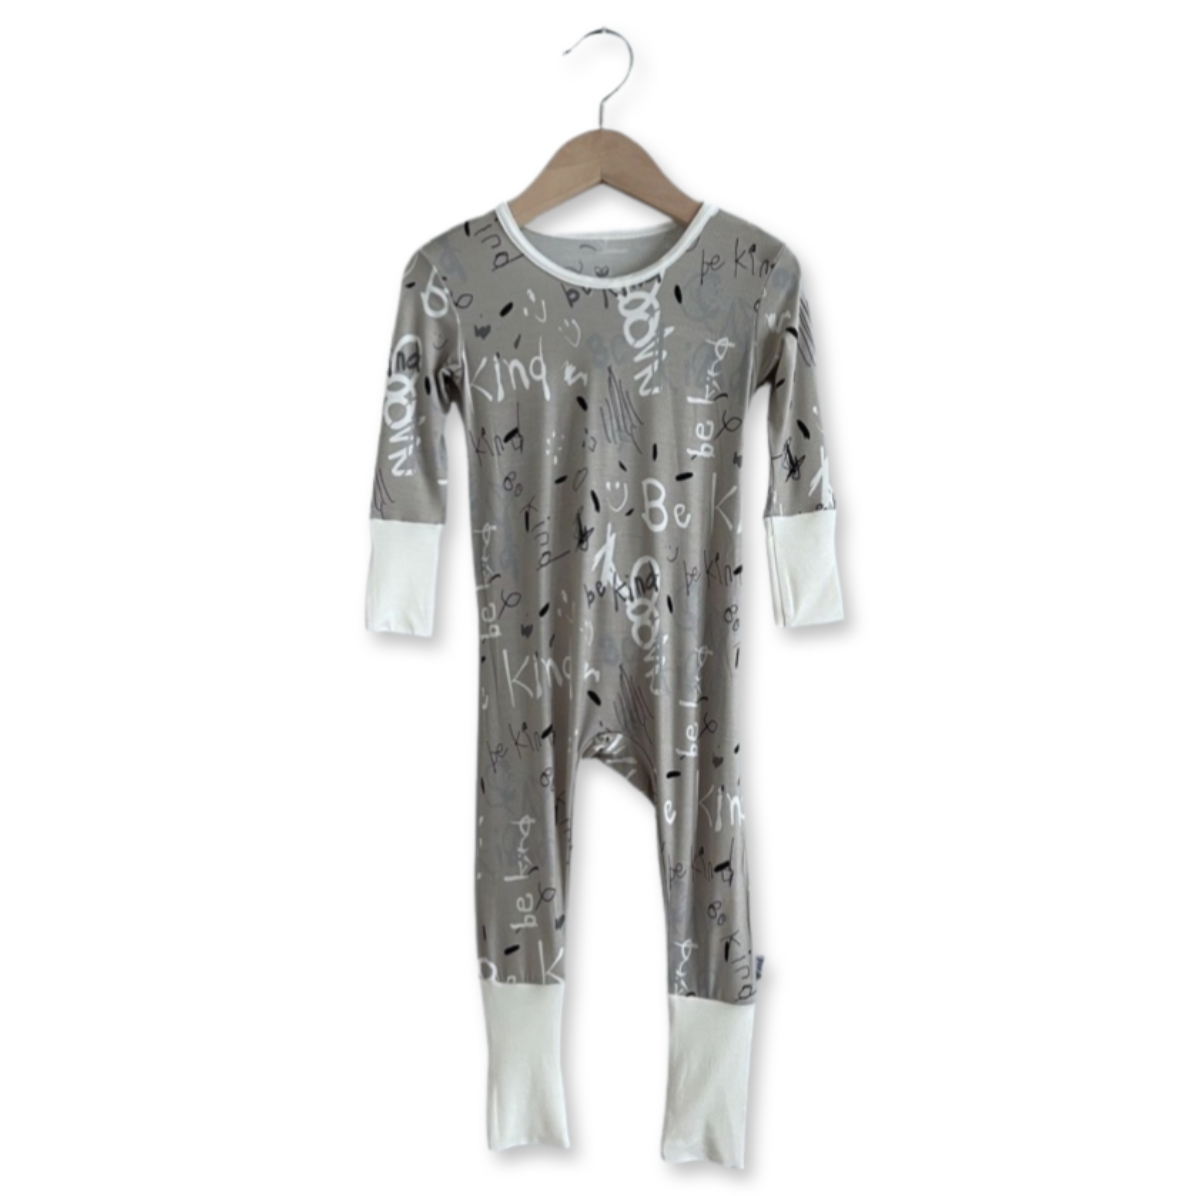 Be Kind Kid's Day to Night Romper